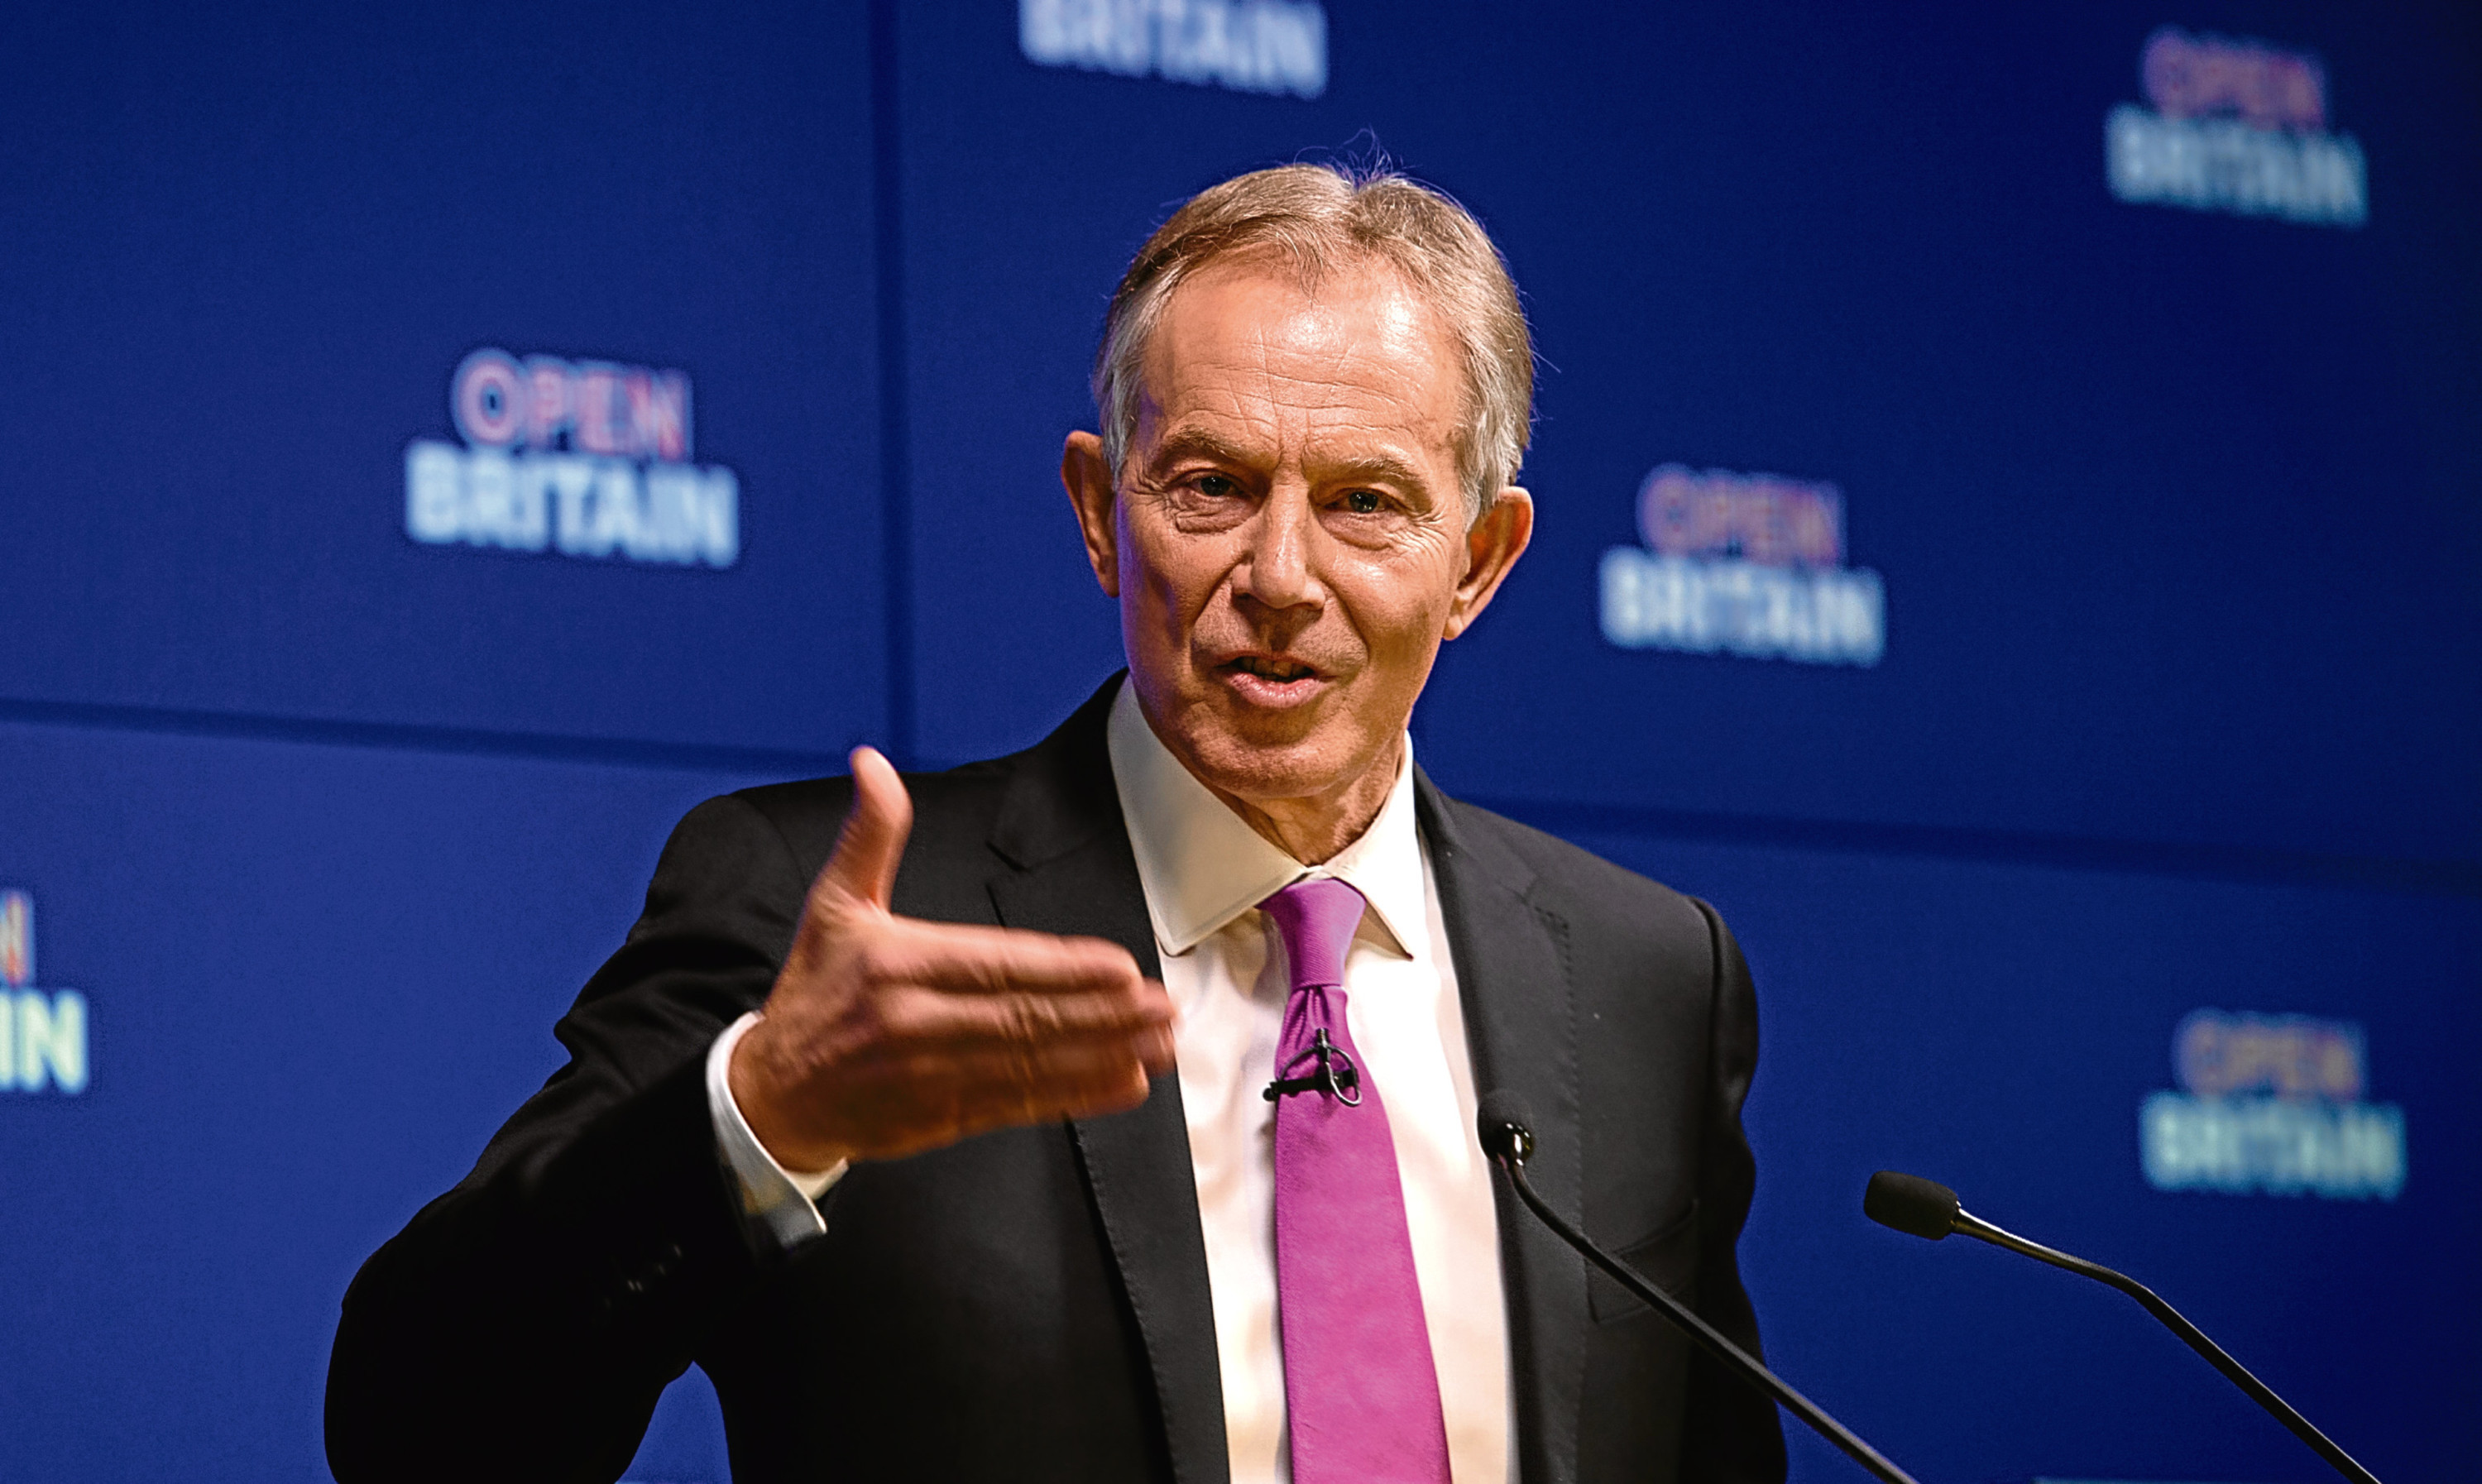 Tony Blair during his speech to Open Britain last week.